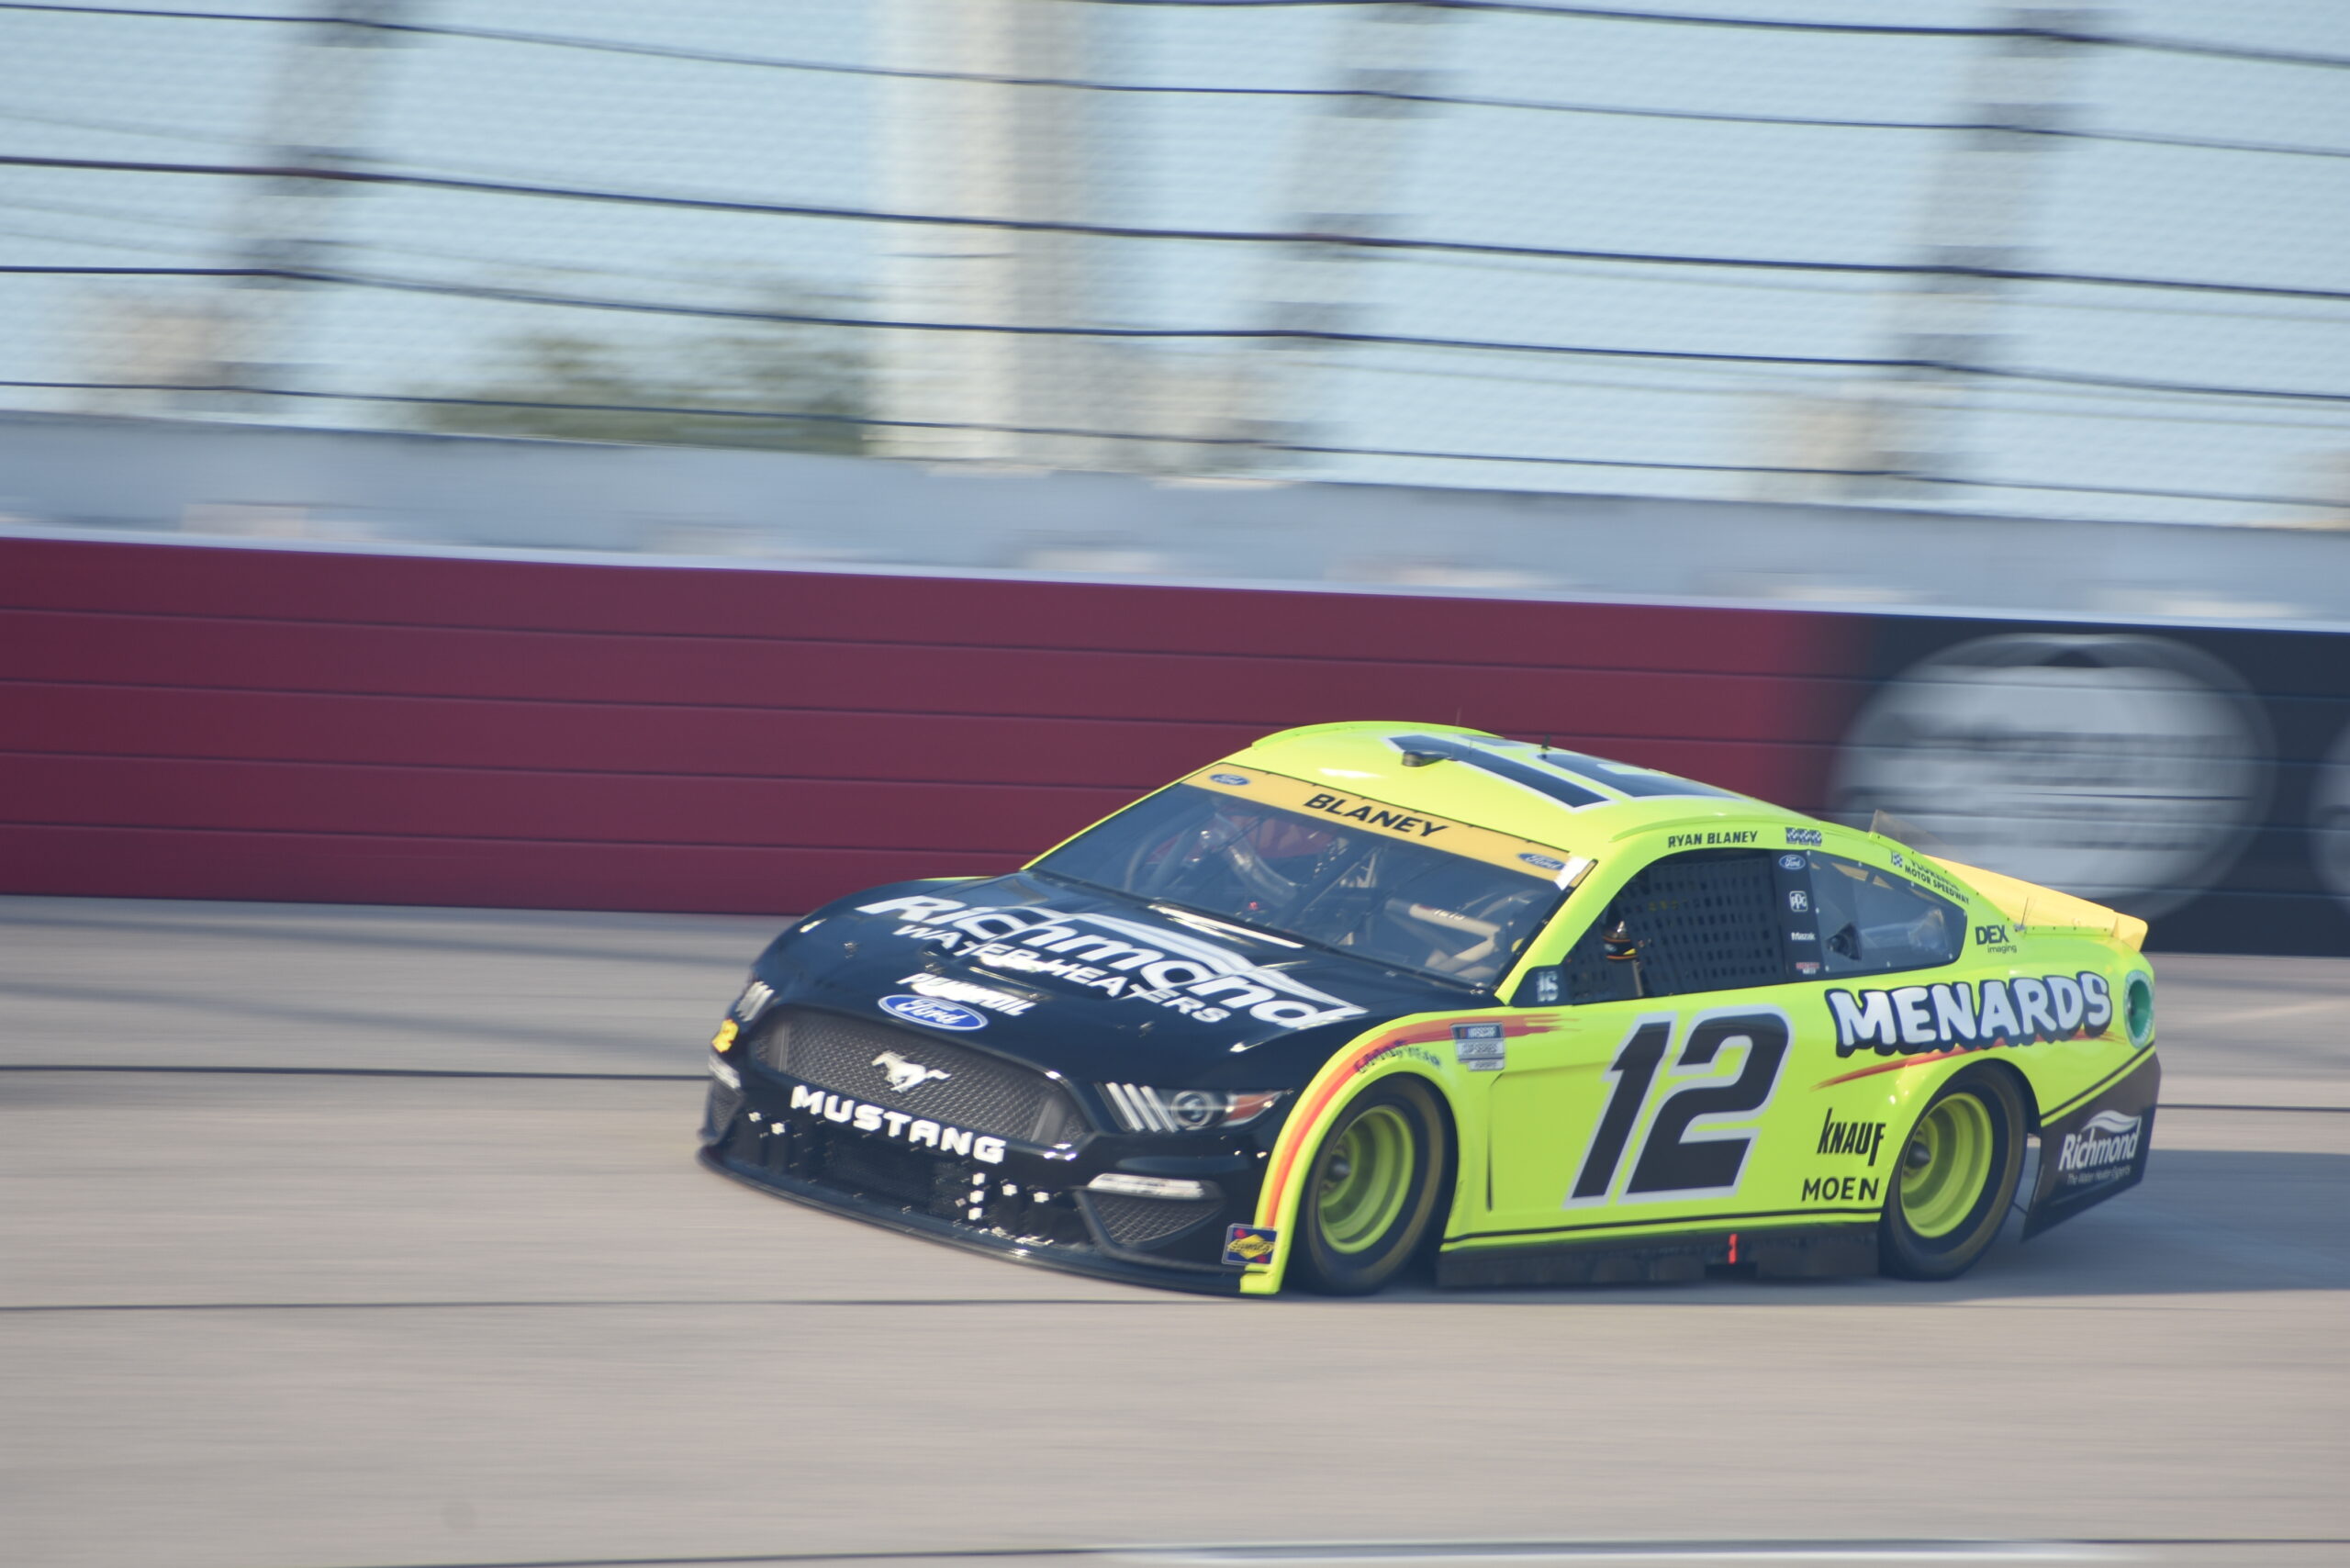 "It’s definitely not the drivers who get this car on the racetrack.  We just race them." - Ryan Blaney (Photo: Michael Guariglia | The Podium Finish)